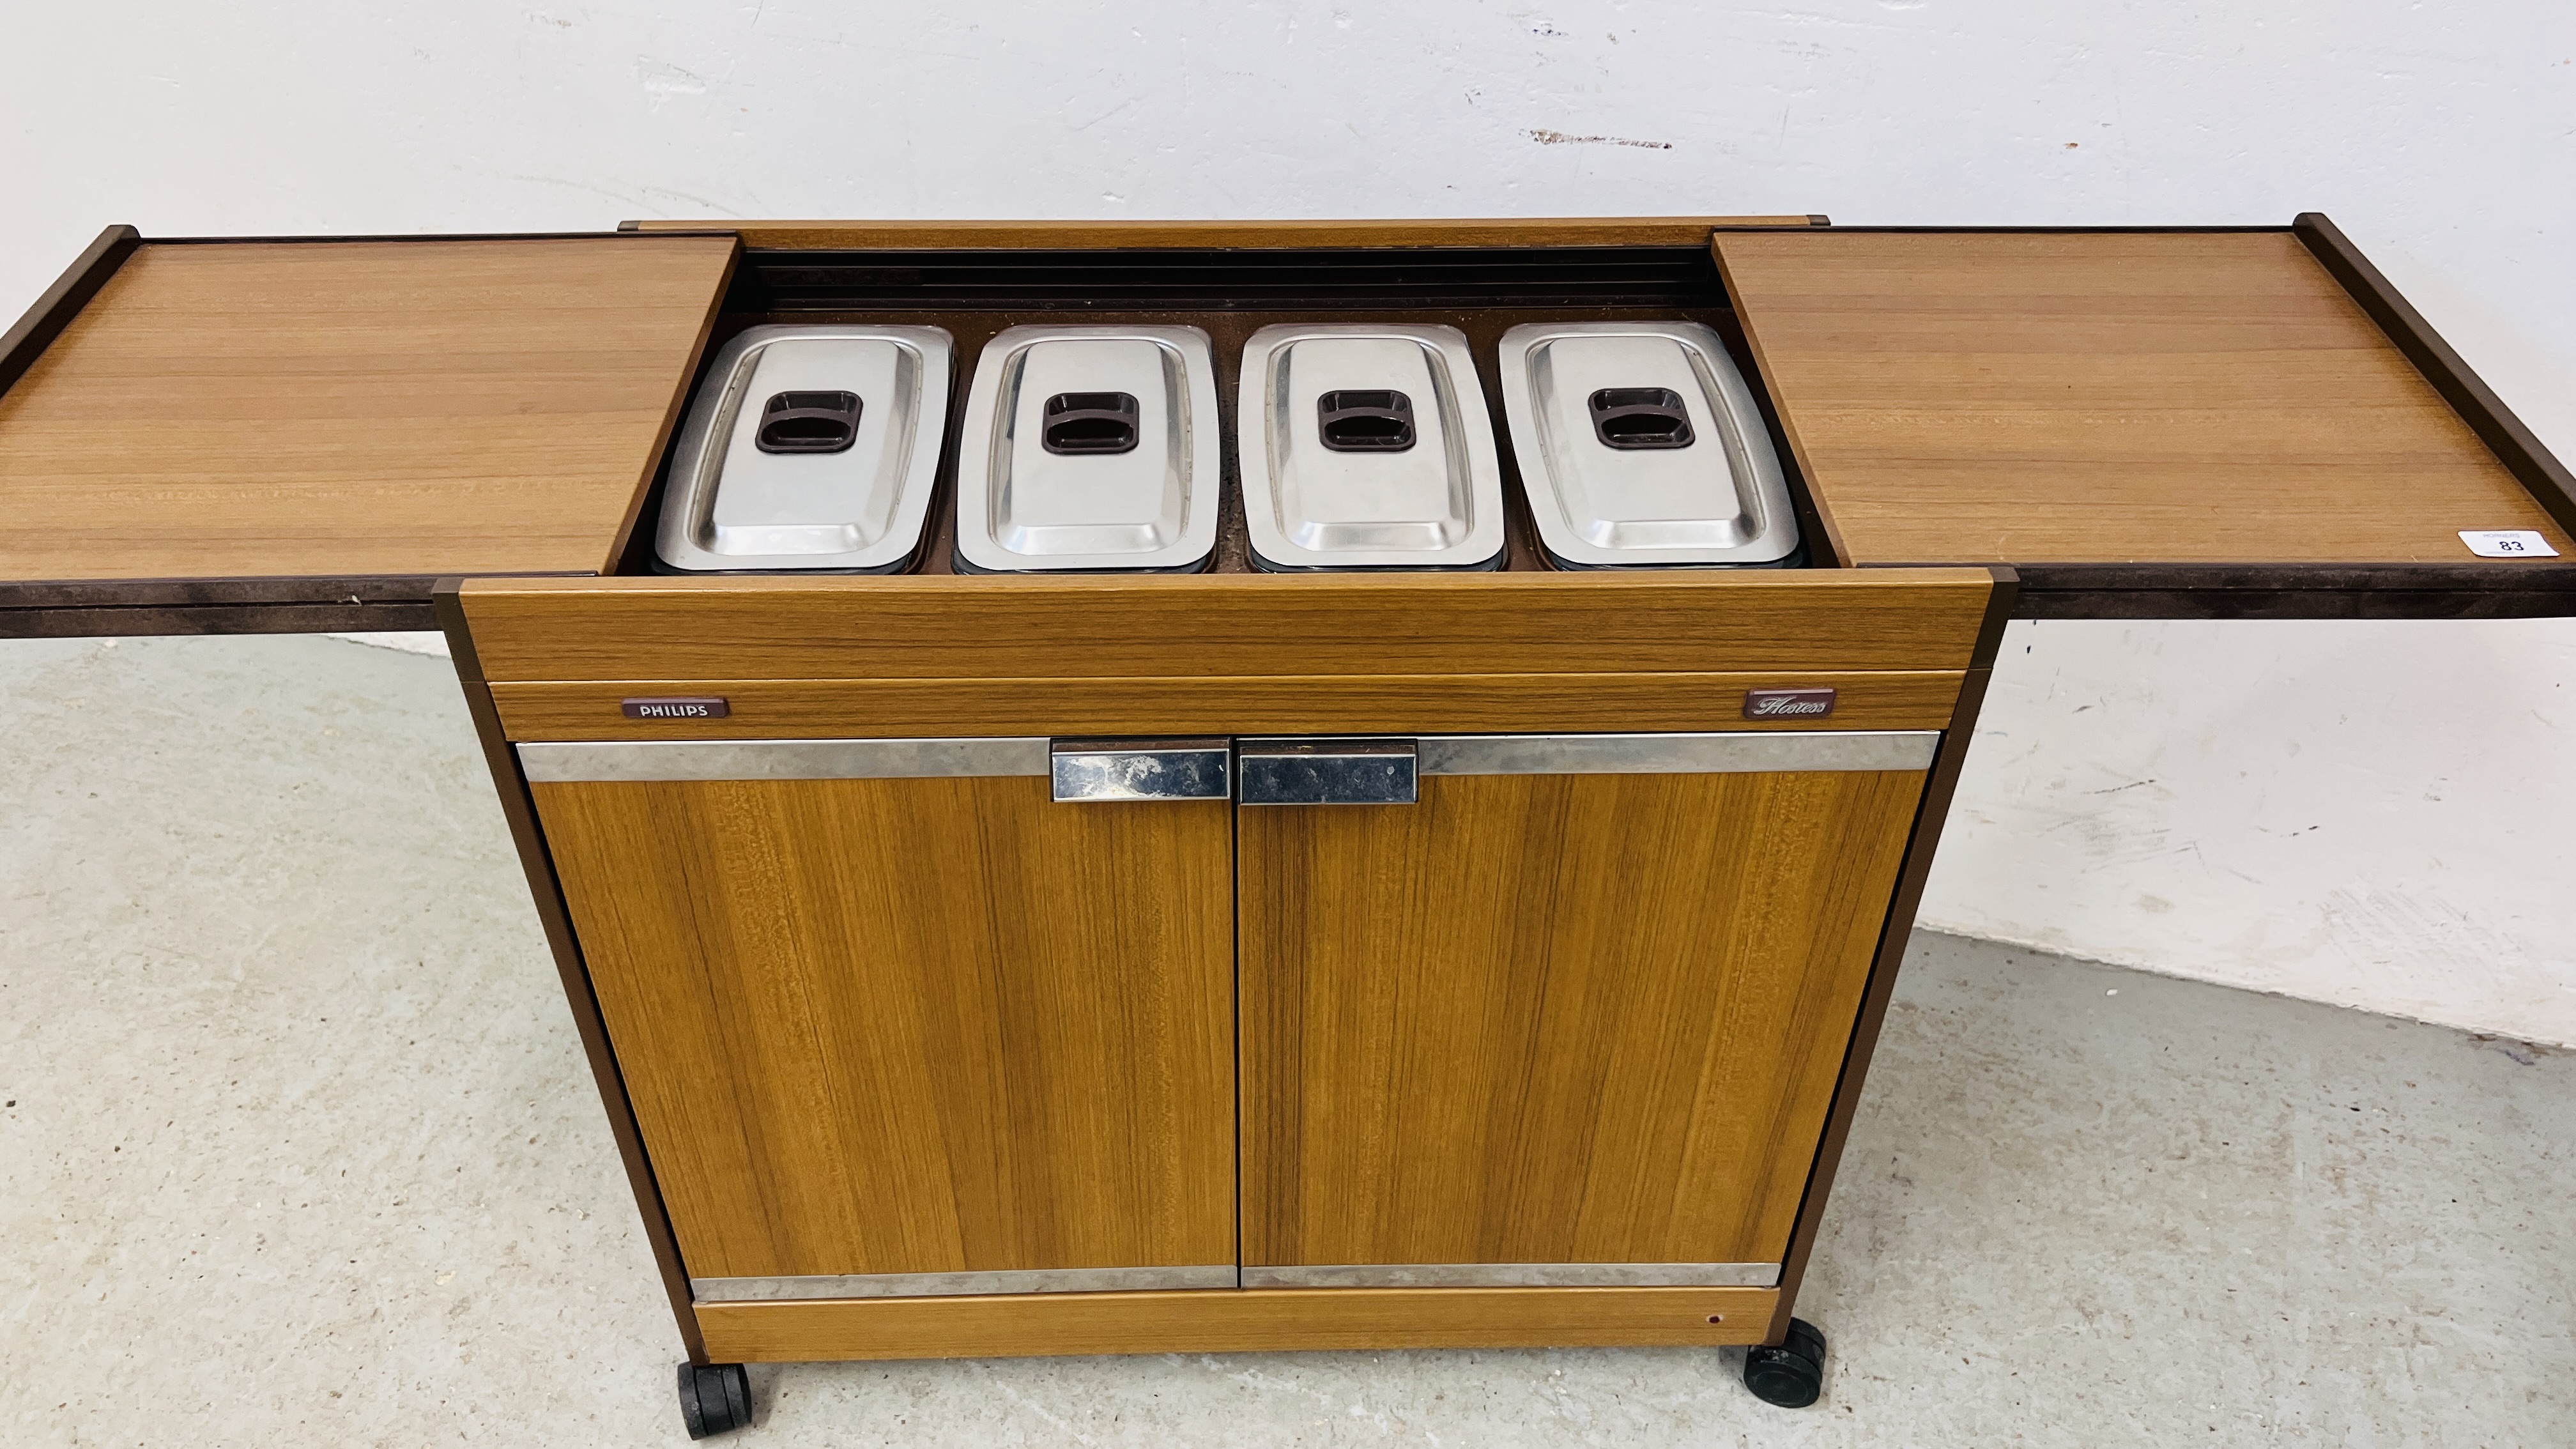 PHILIPS HOSTESS TROLLEY ALONG WITH A PHILIPS HOSTESS 4 SECTION WARMING BUFFET - SOLD AS SEEN. - Image 6 of 7